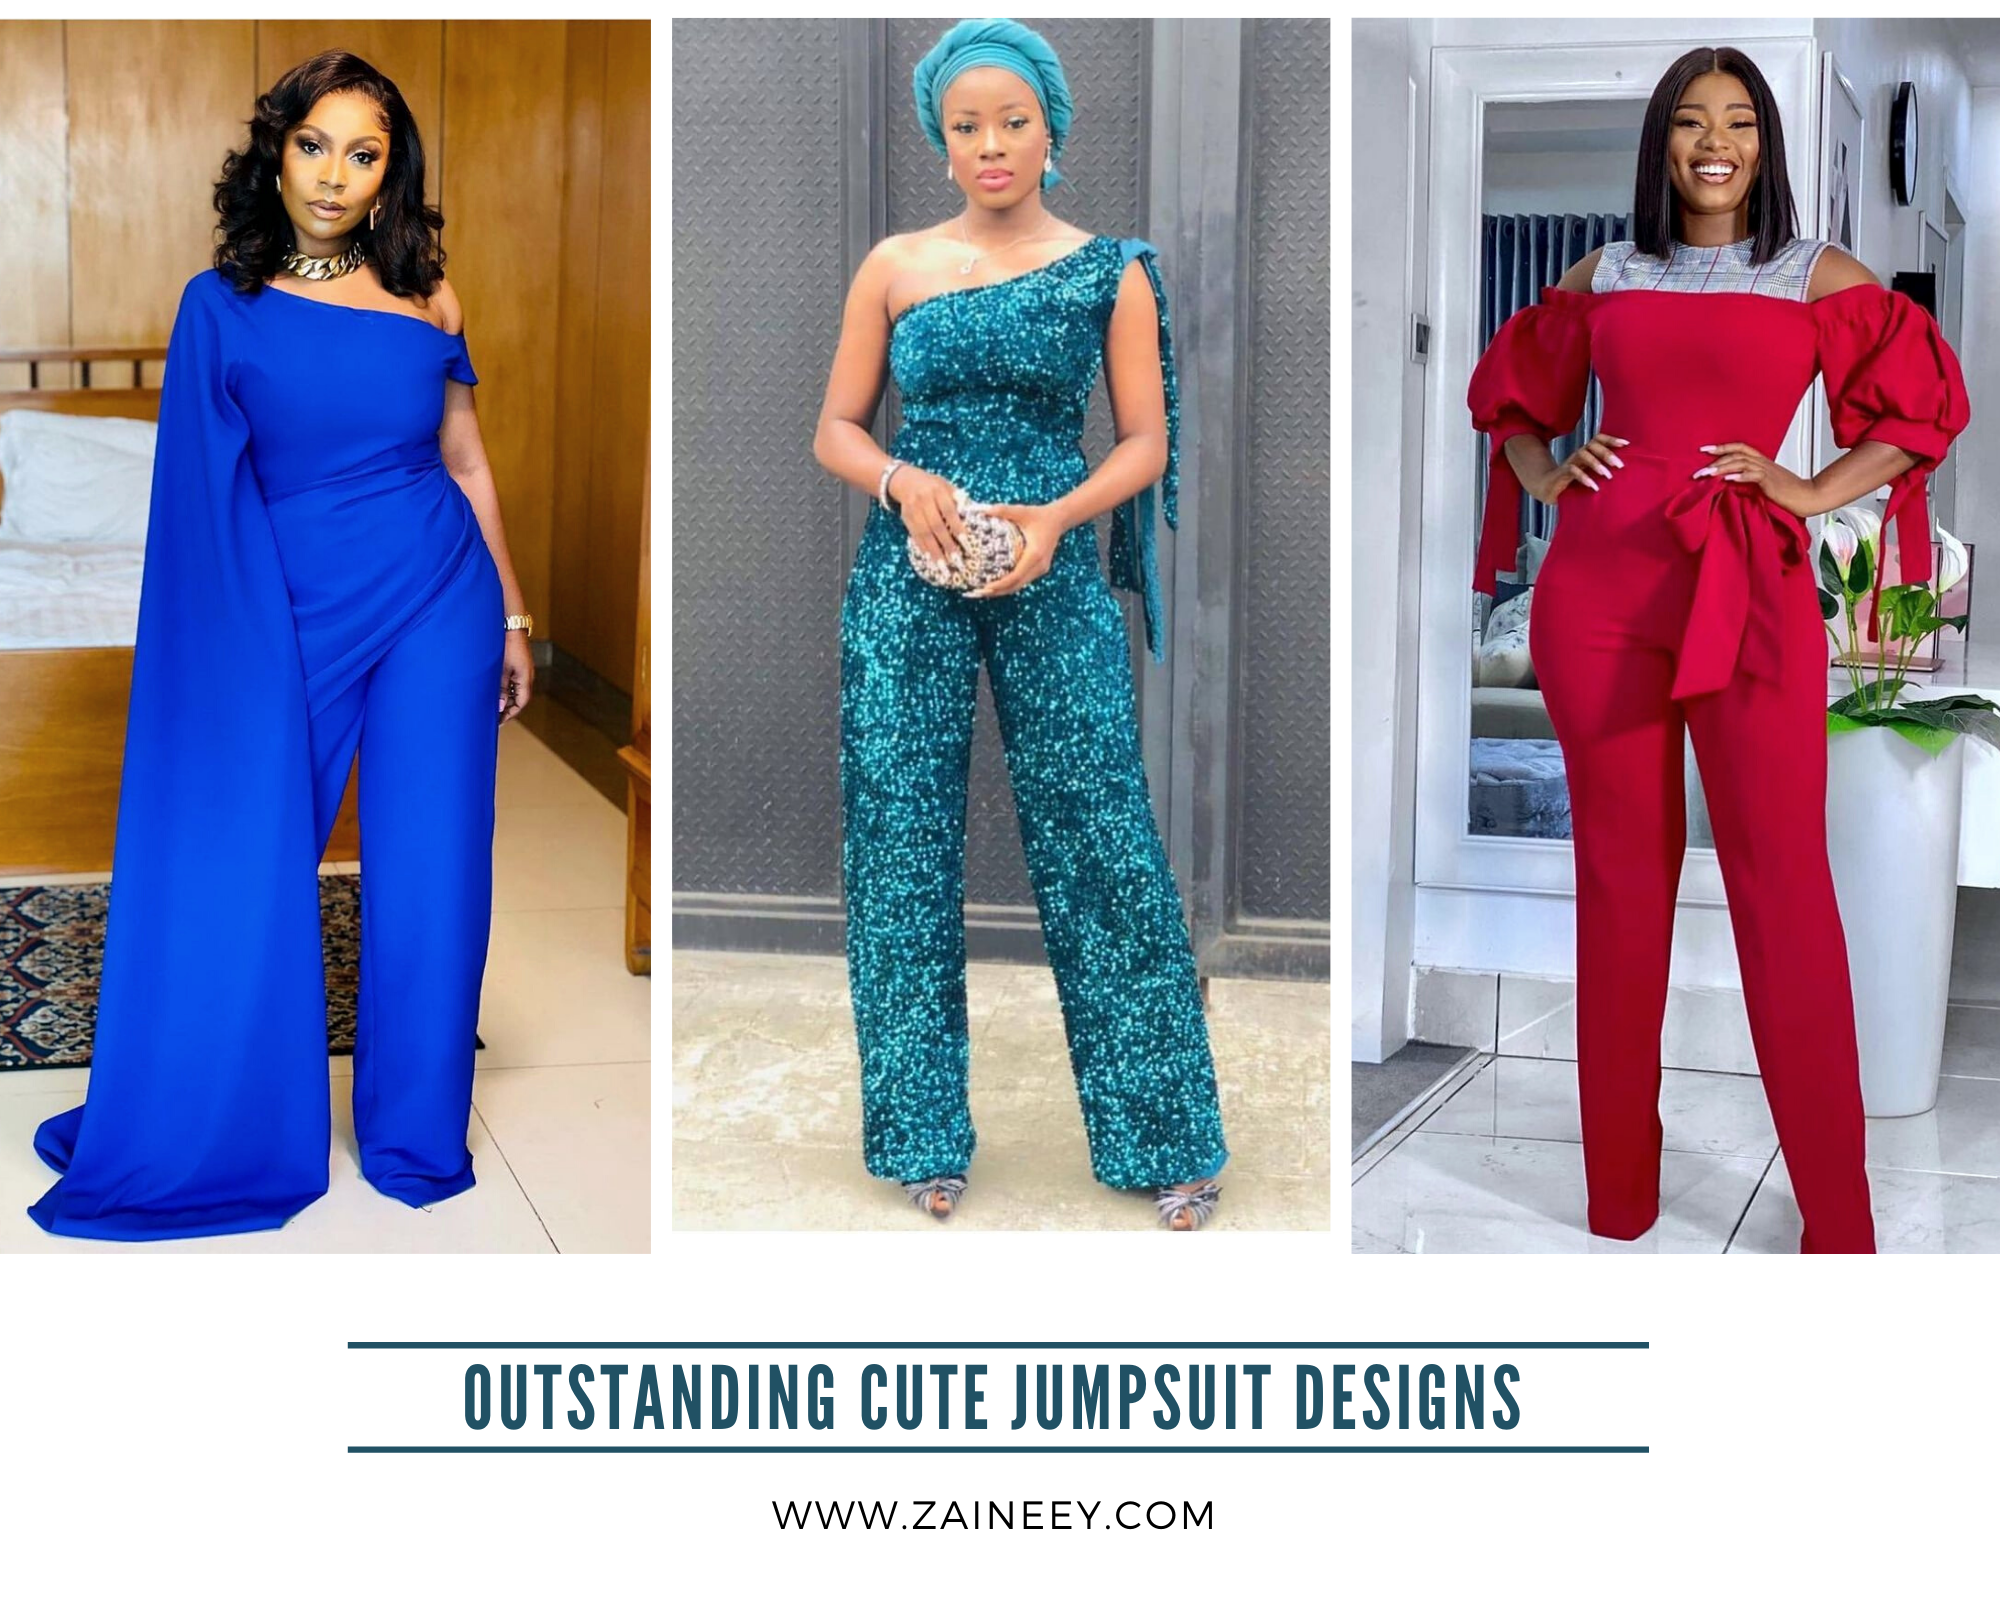 Distinctive and Outstanding Cute Jumpsuit Designs for Fashion Lovers